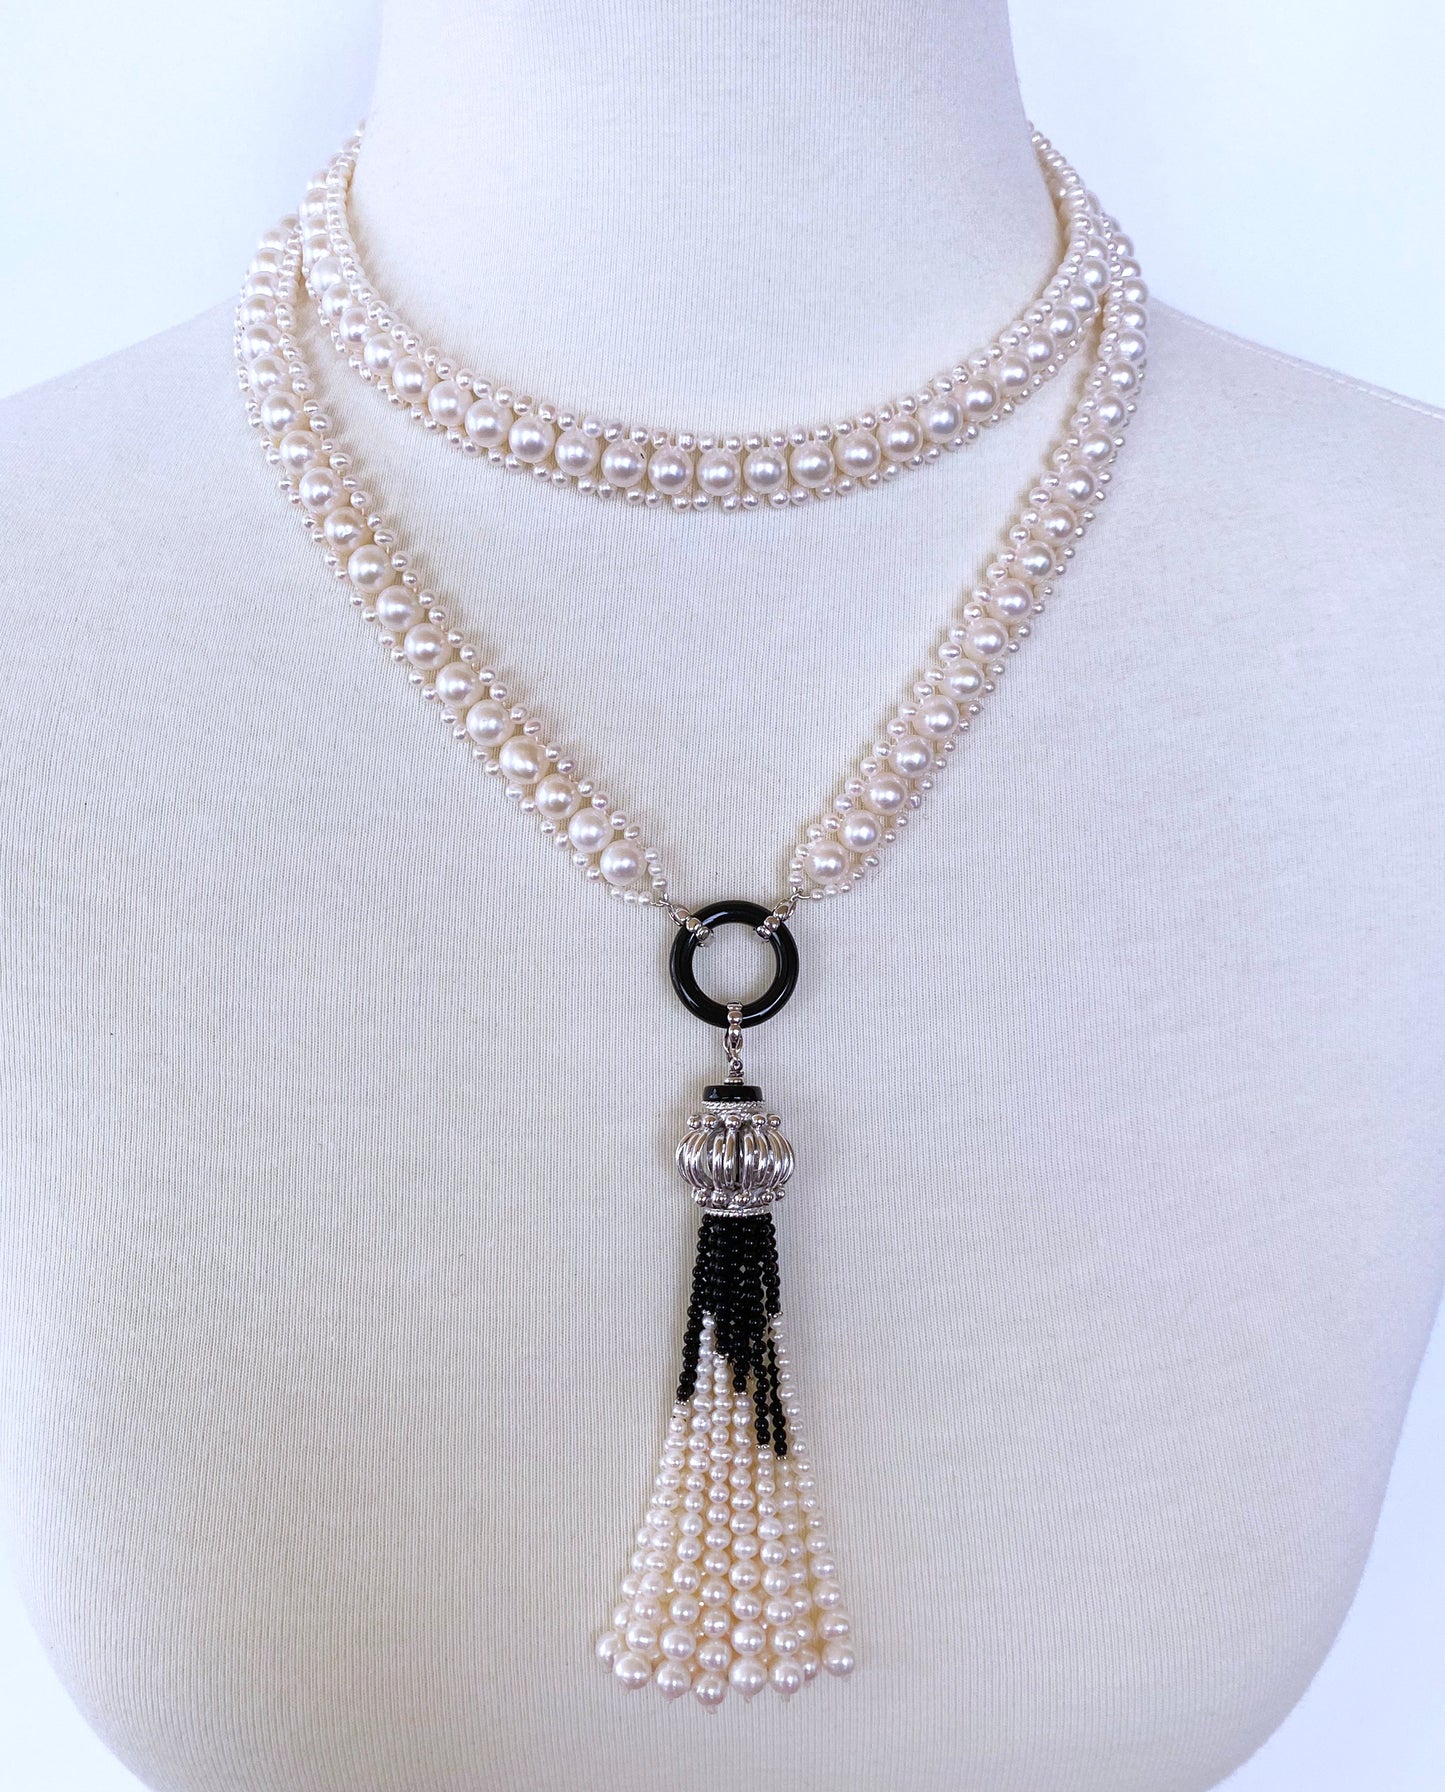 Marina J. Woven Pearl Sautoir with Black Onyx and Silver